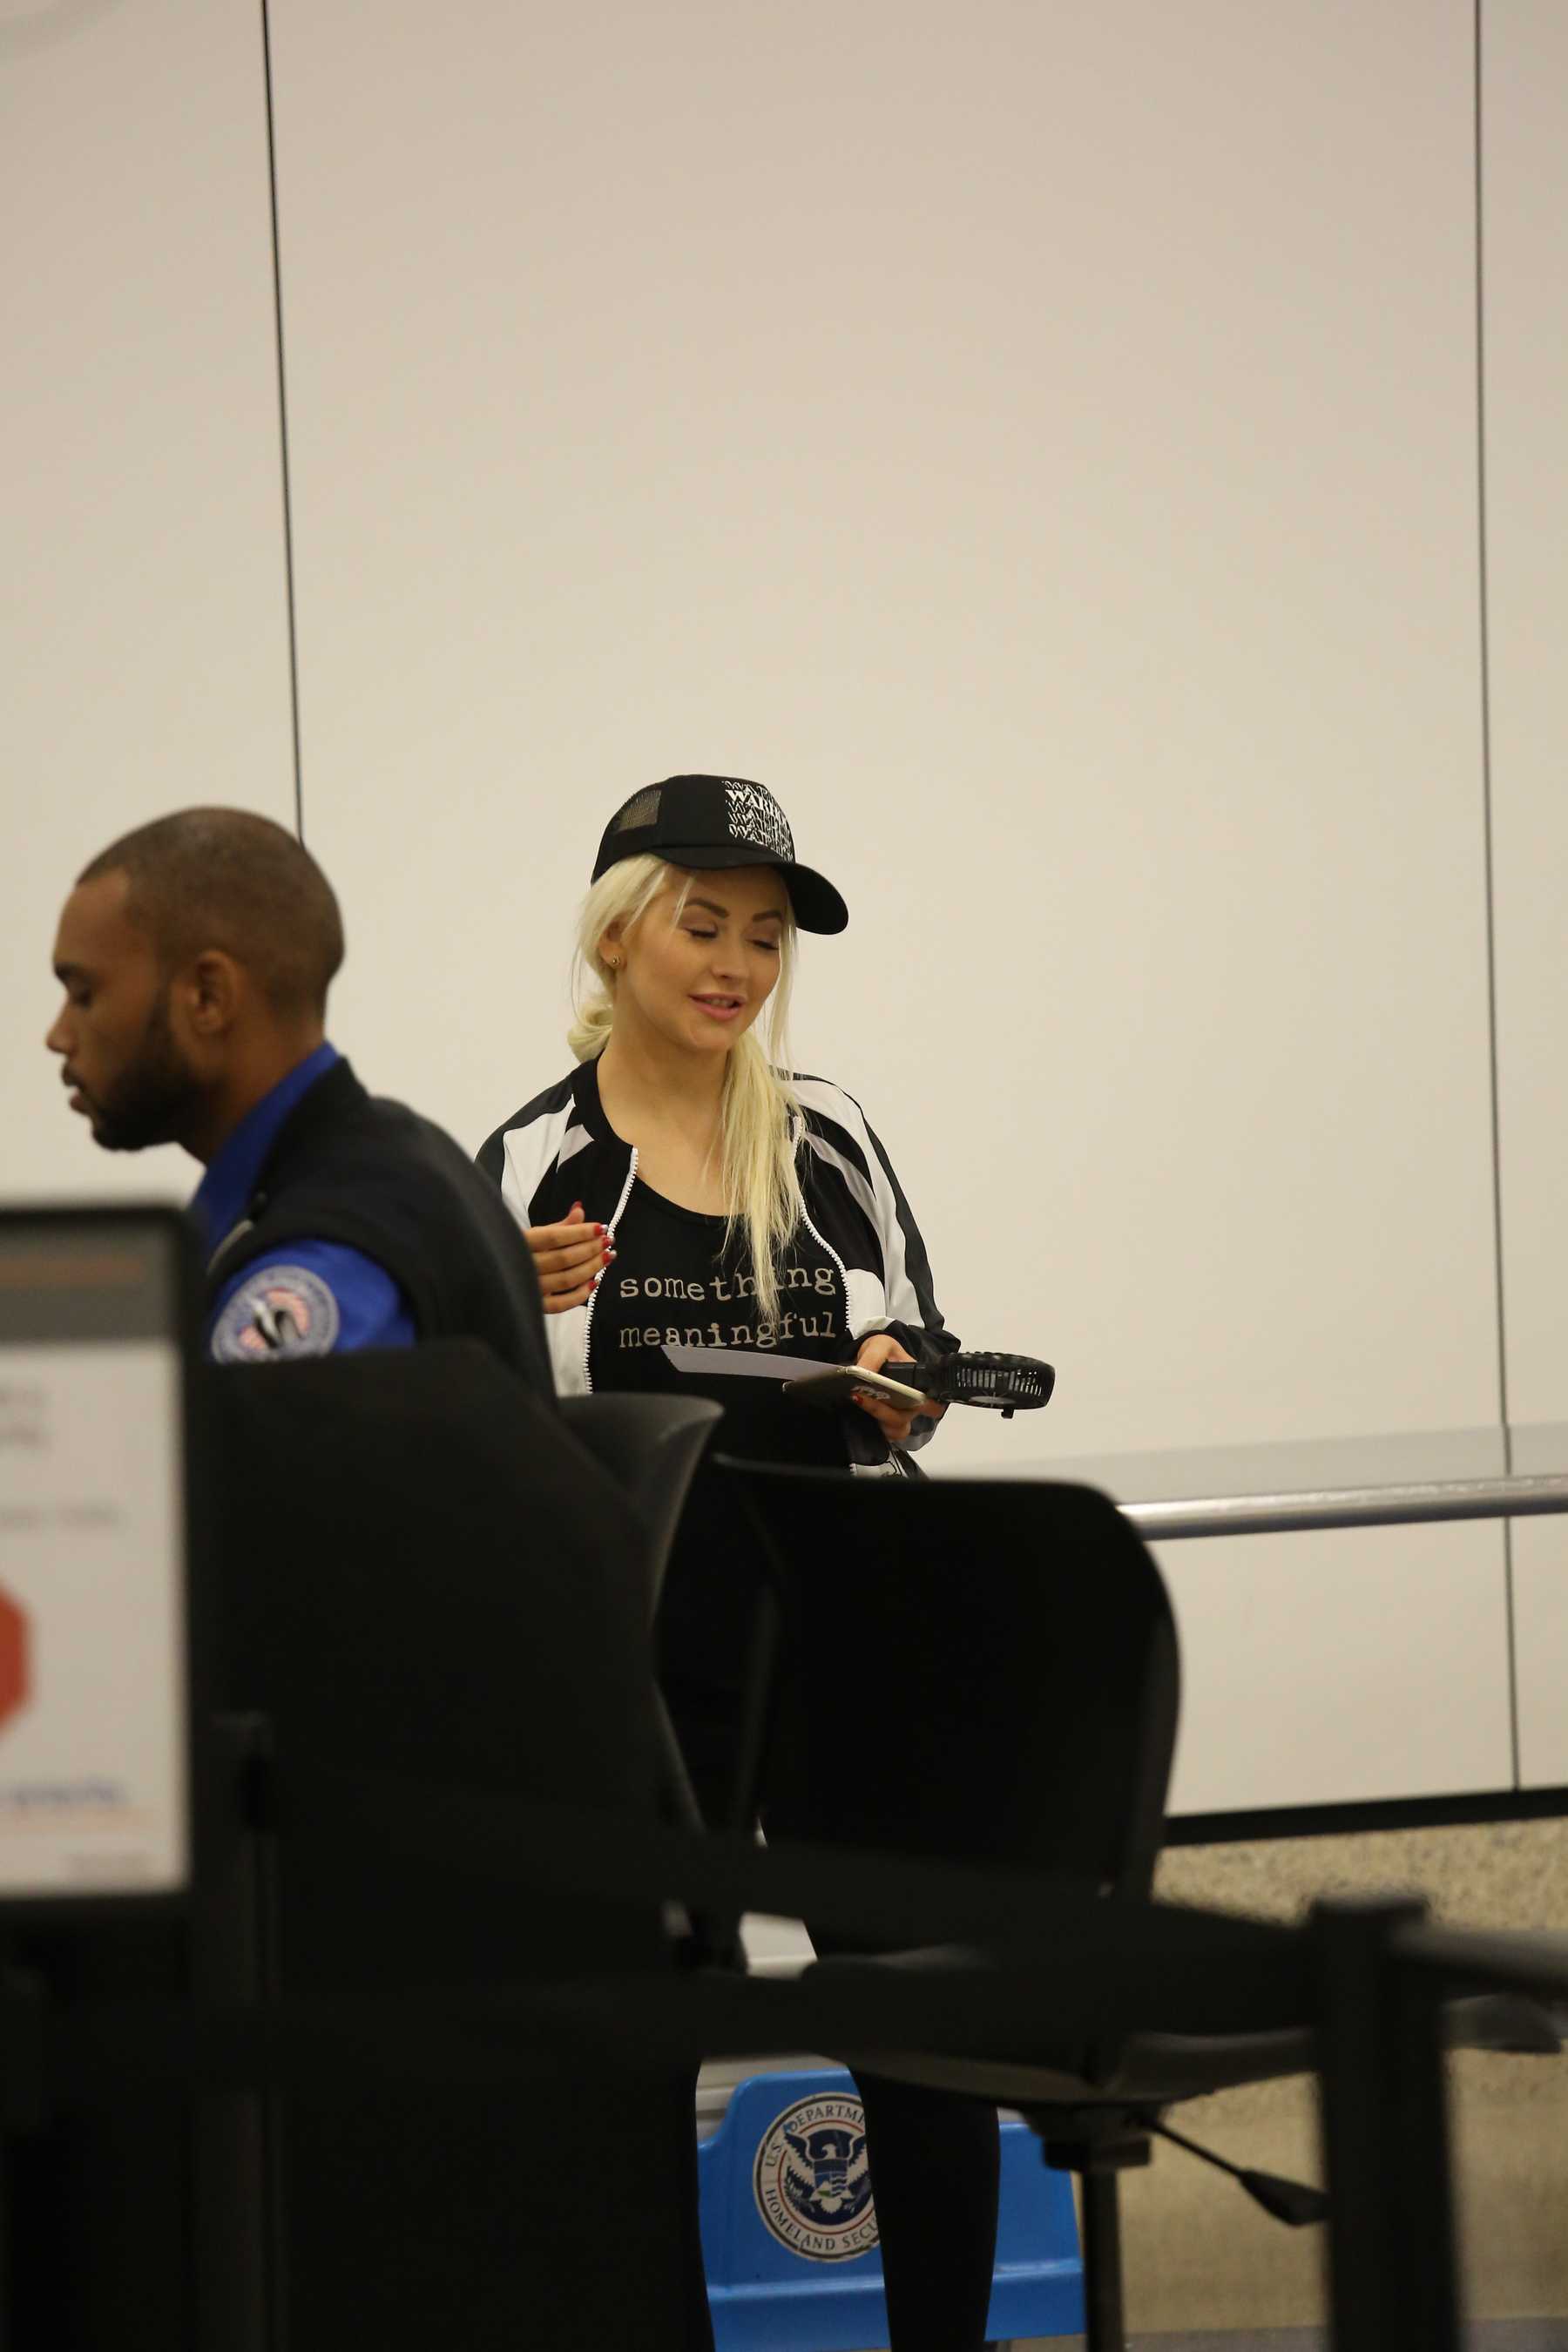 Christina_Aguilera_-_At_LAX_Airport_in_Los_Angeles_on_September_3-20.jpg